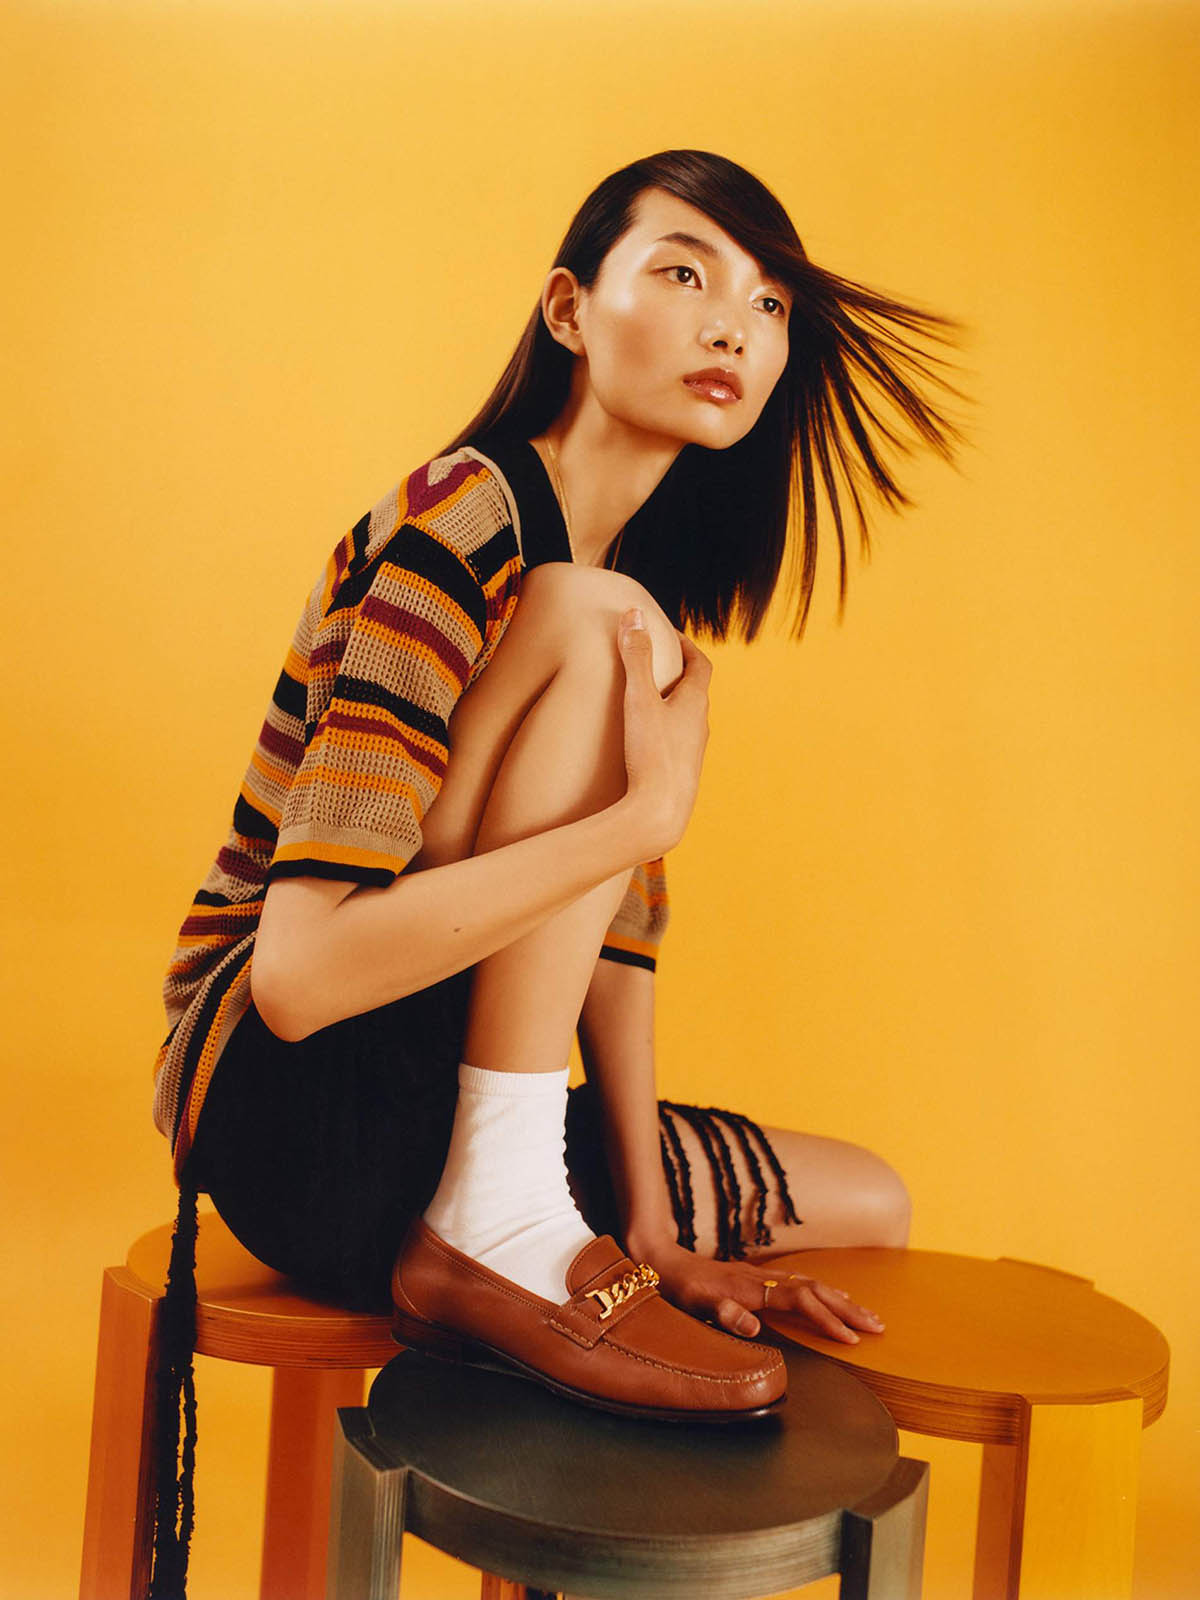 Ling Chen covers Porter Magazine May 17th, 2021 by Juliette Cassidy